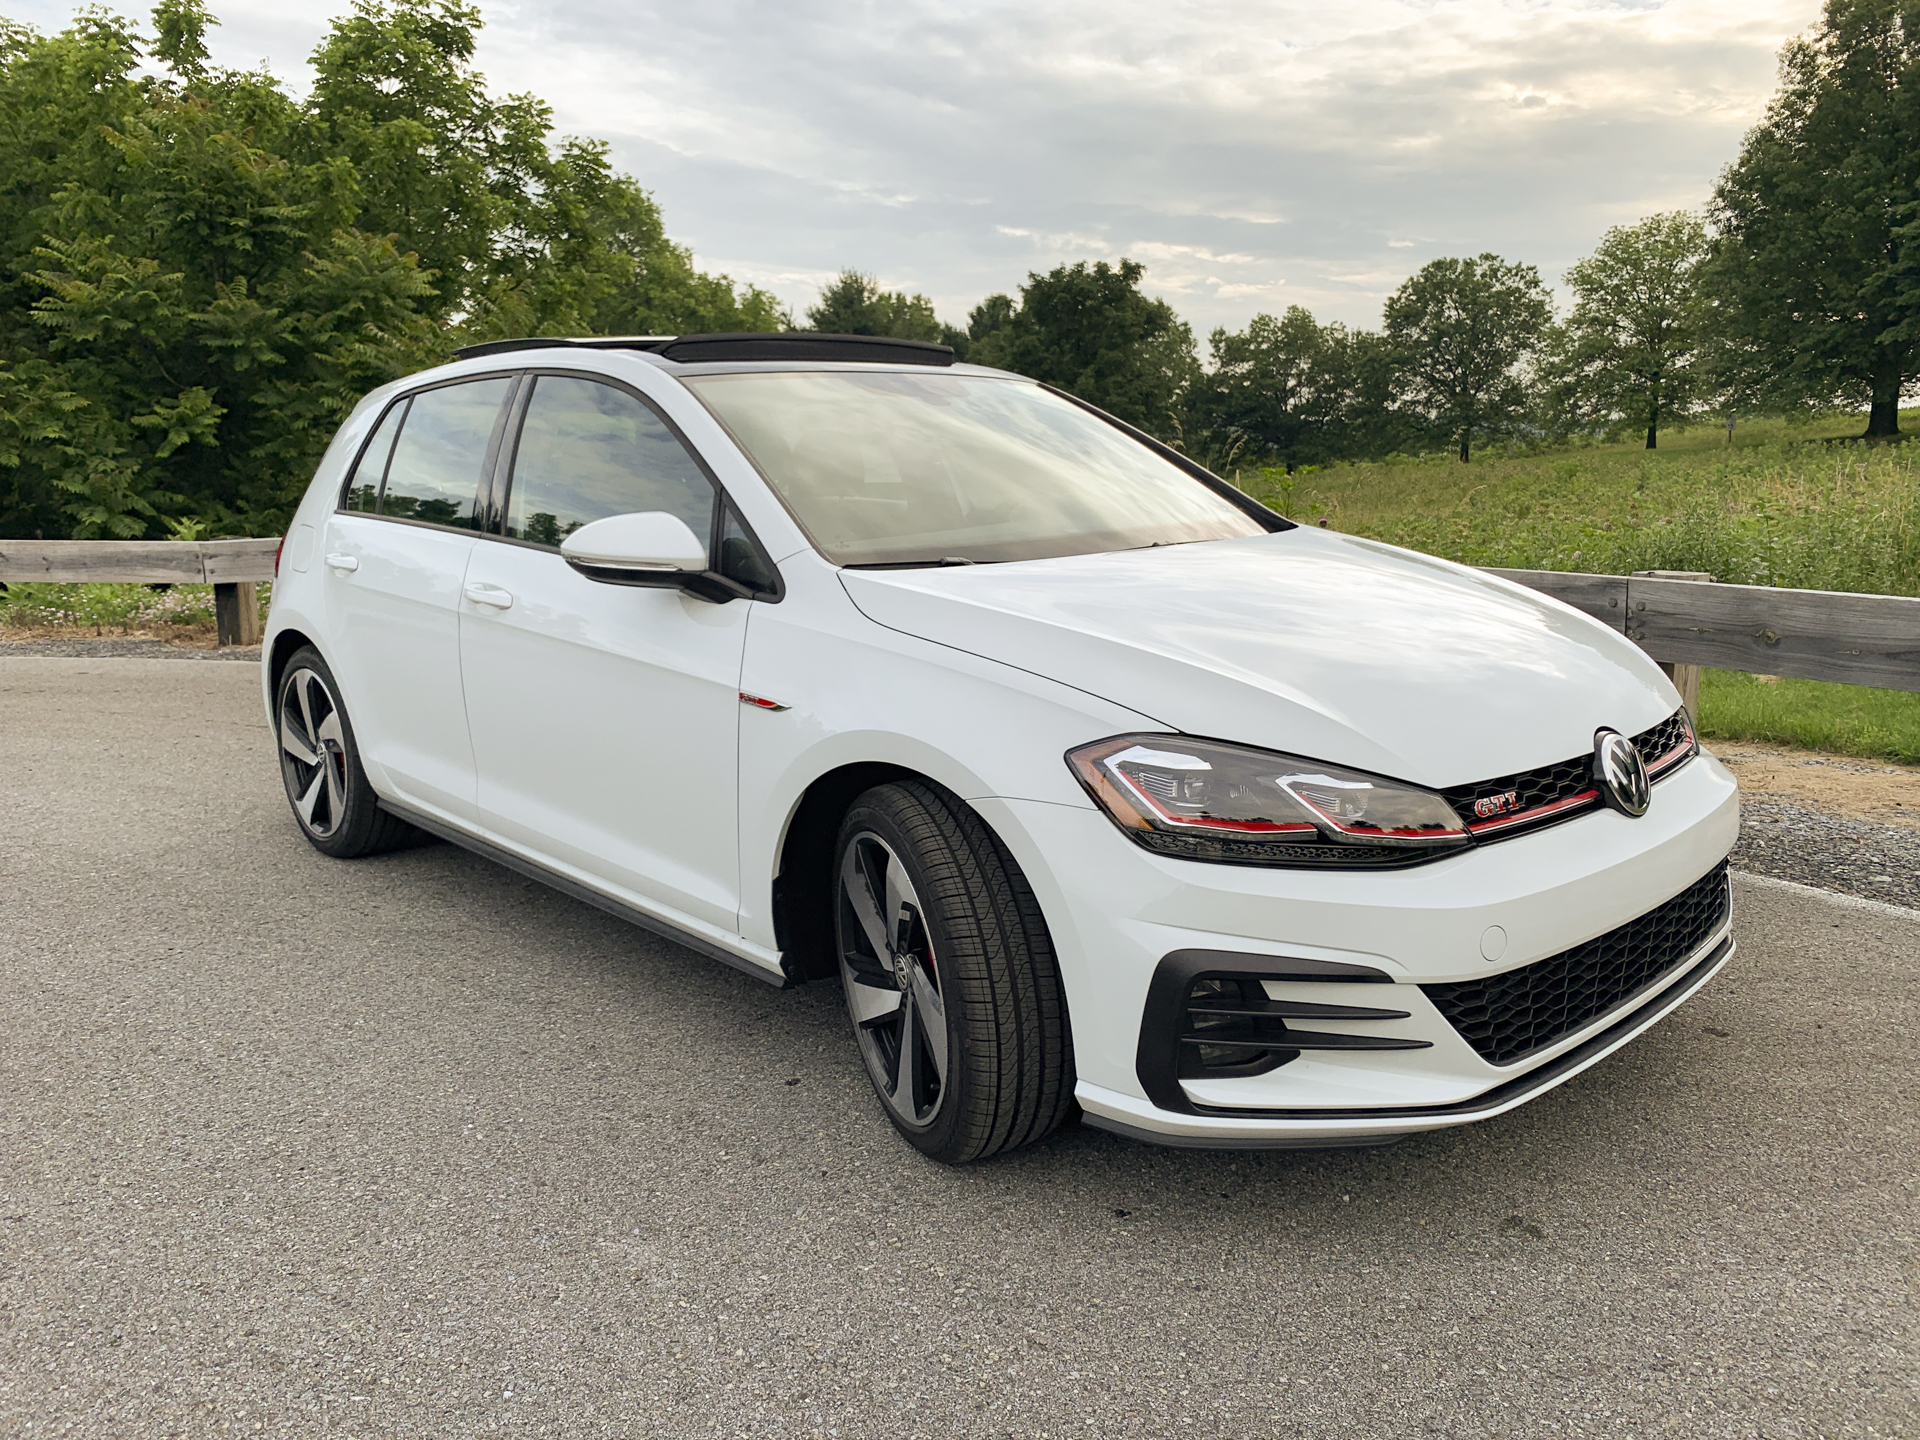 2019 Volkswagen Golf GTI Review: More Power And More Tech